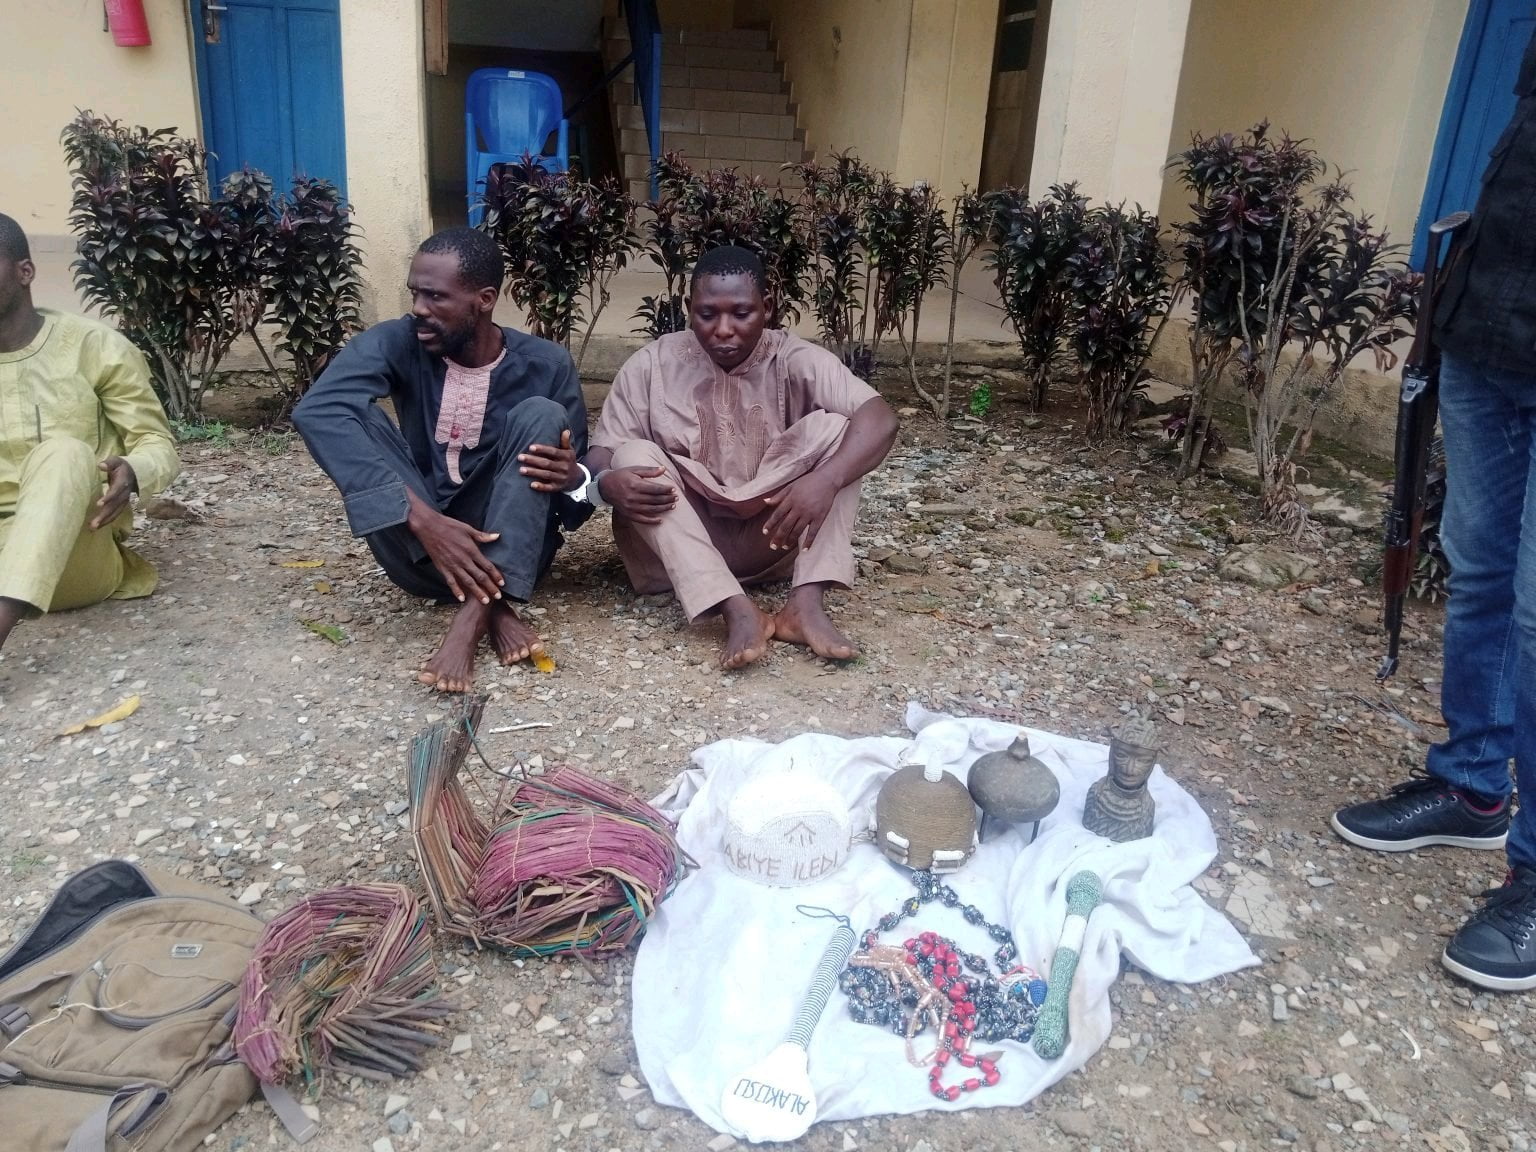 Herbalist kills customers, share body parts for alleged money rituals